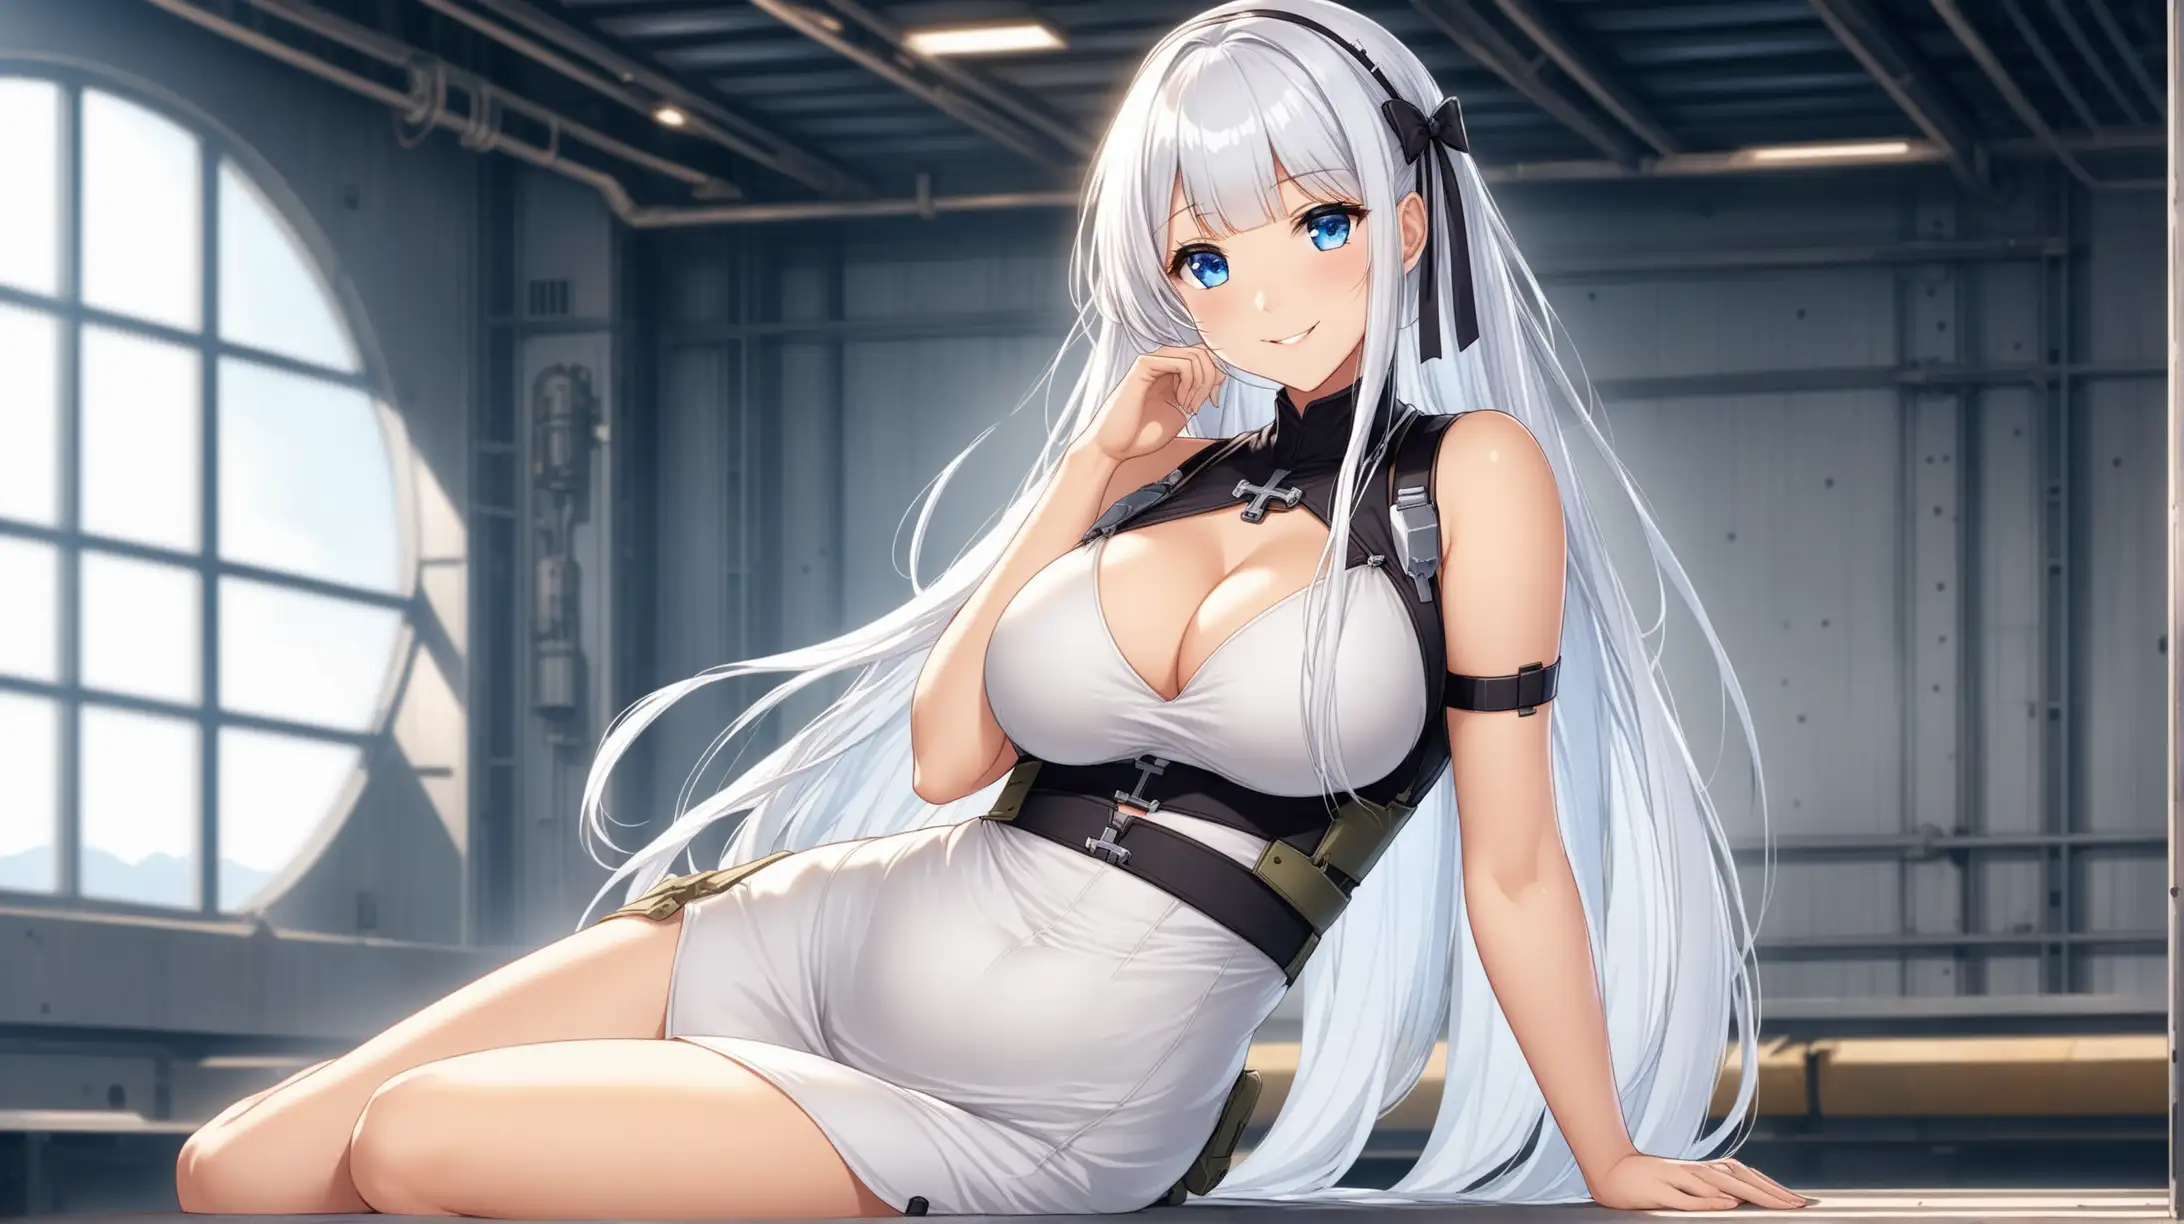 Illustrious from Azur Lane in FalloutInspired Outfit Relaxed Pose in Natural Lighting